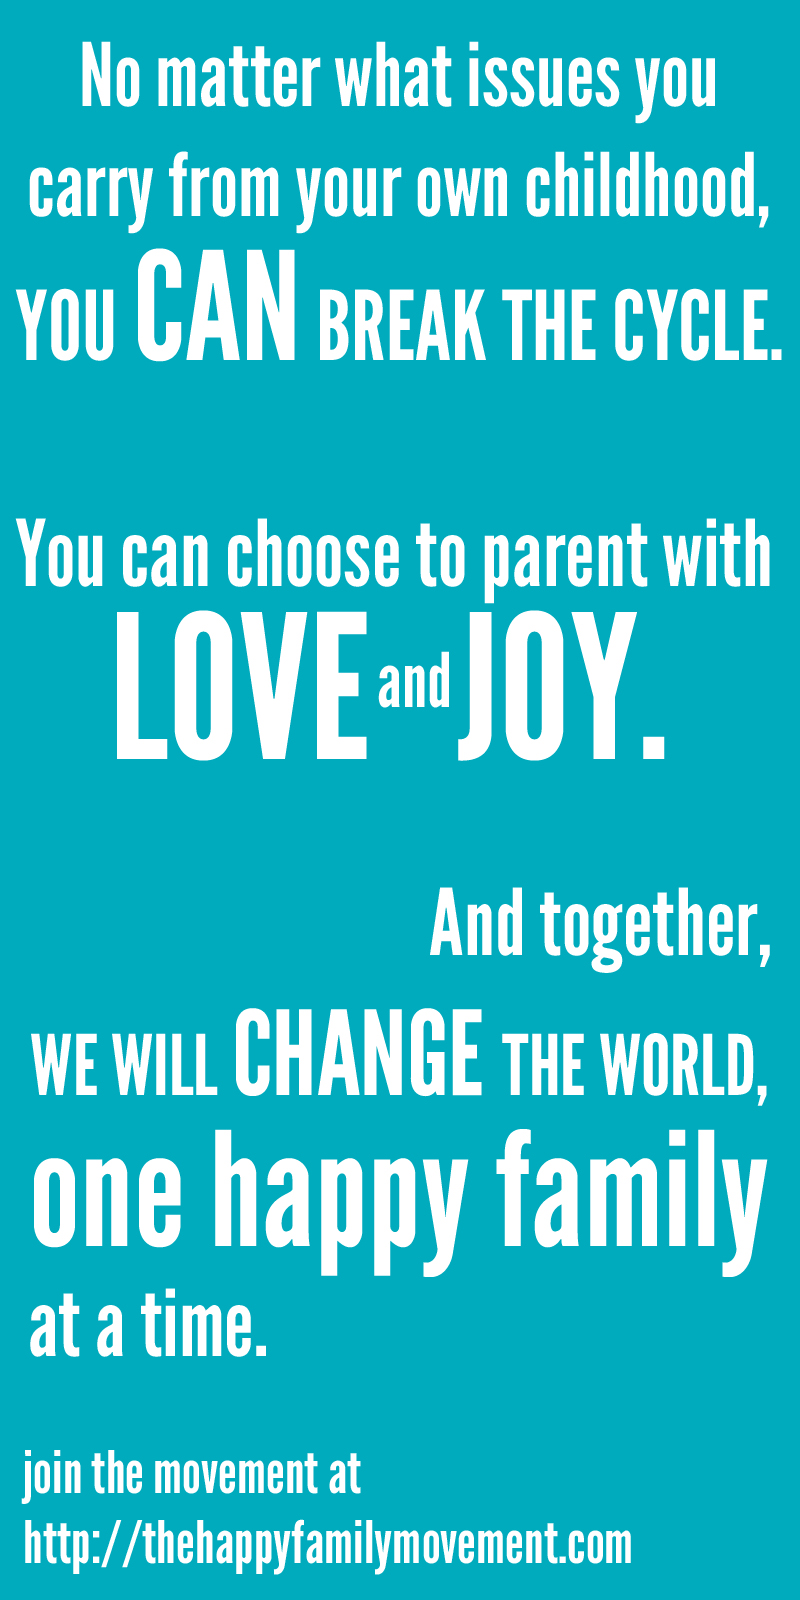 change-the-world-one-happy-family-at-a-time